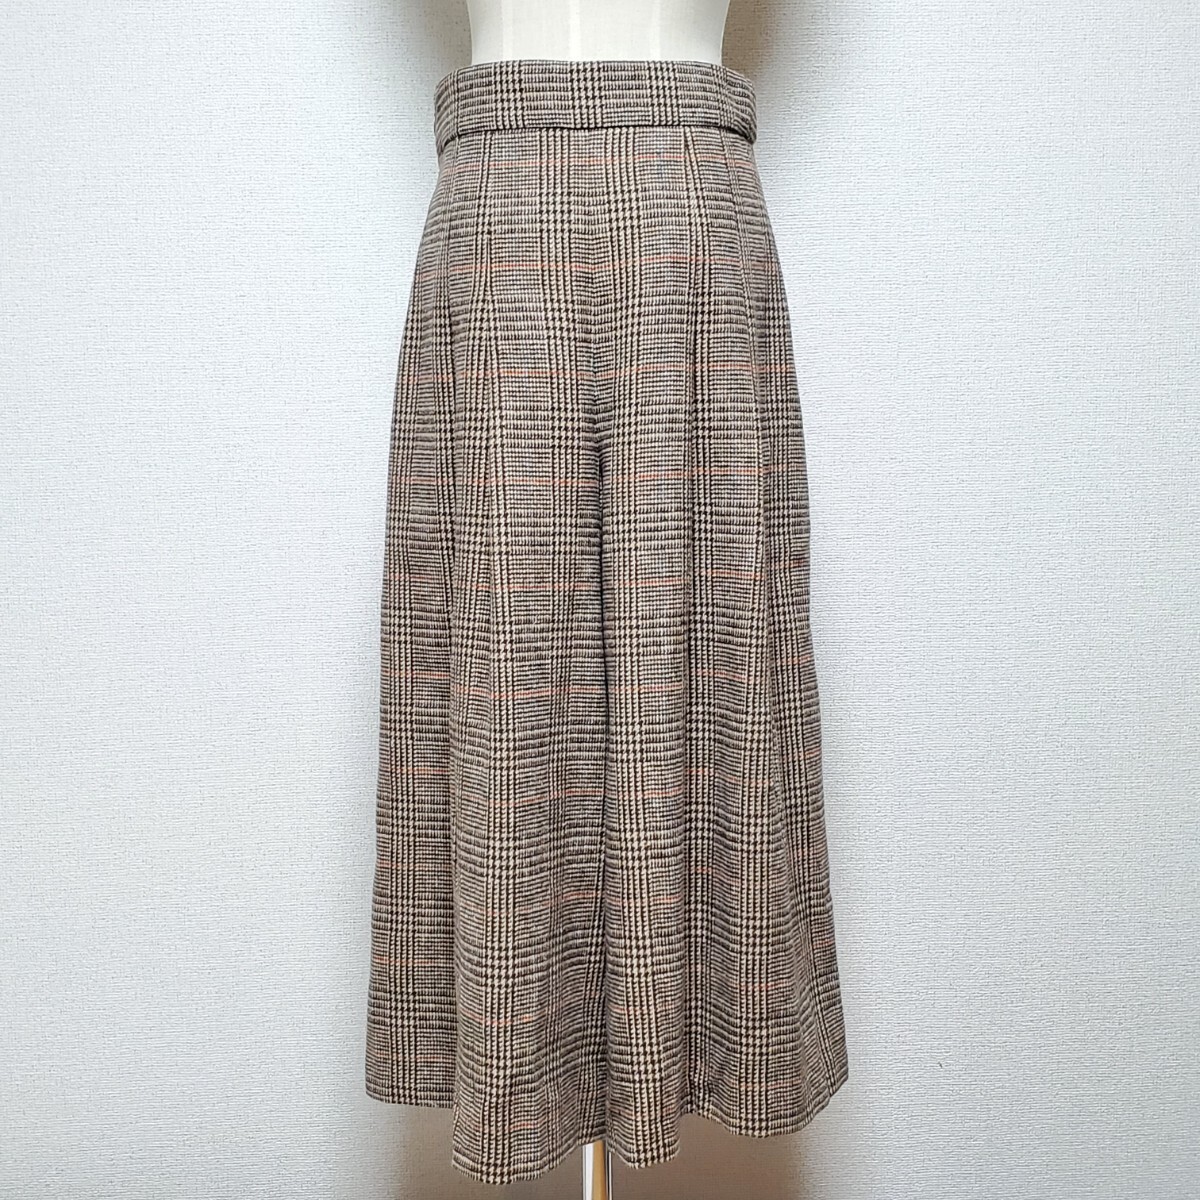 DoCLASSEduklase tweed Like *s couch . brown group size 11 tag attaching unused goods gaucho pants culotte 